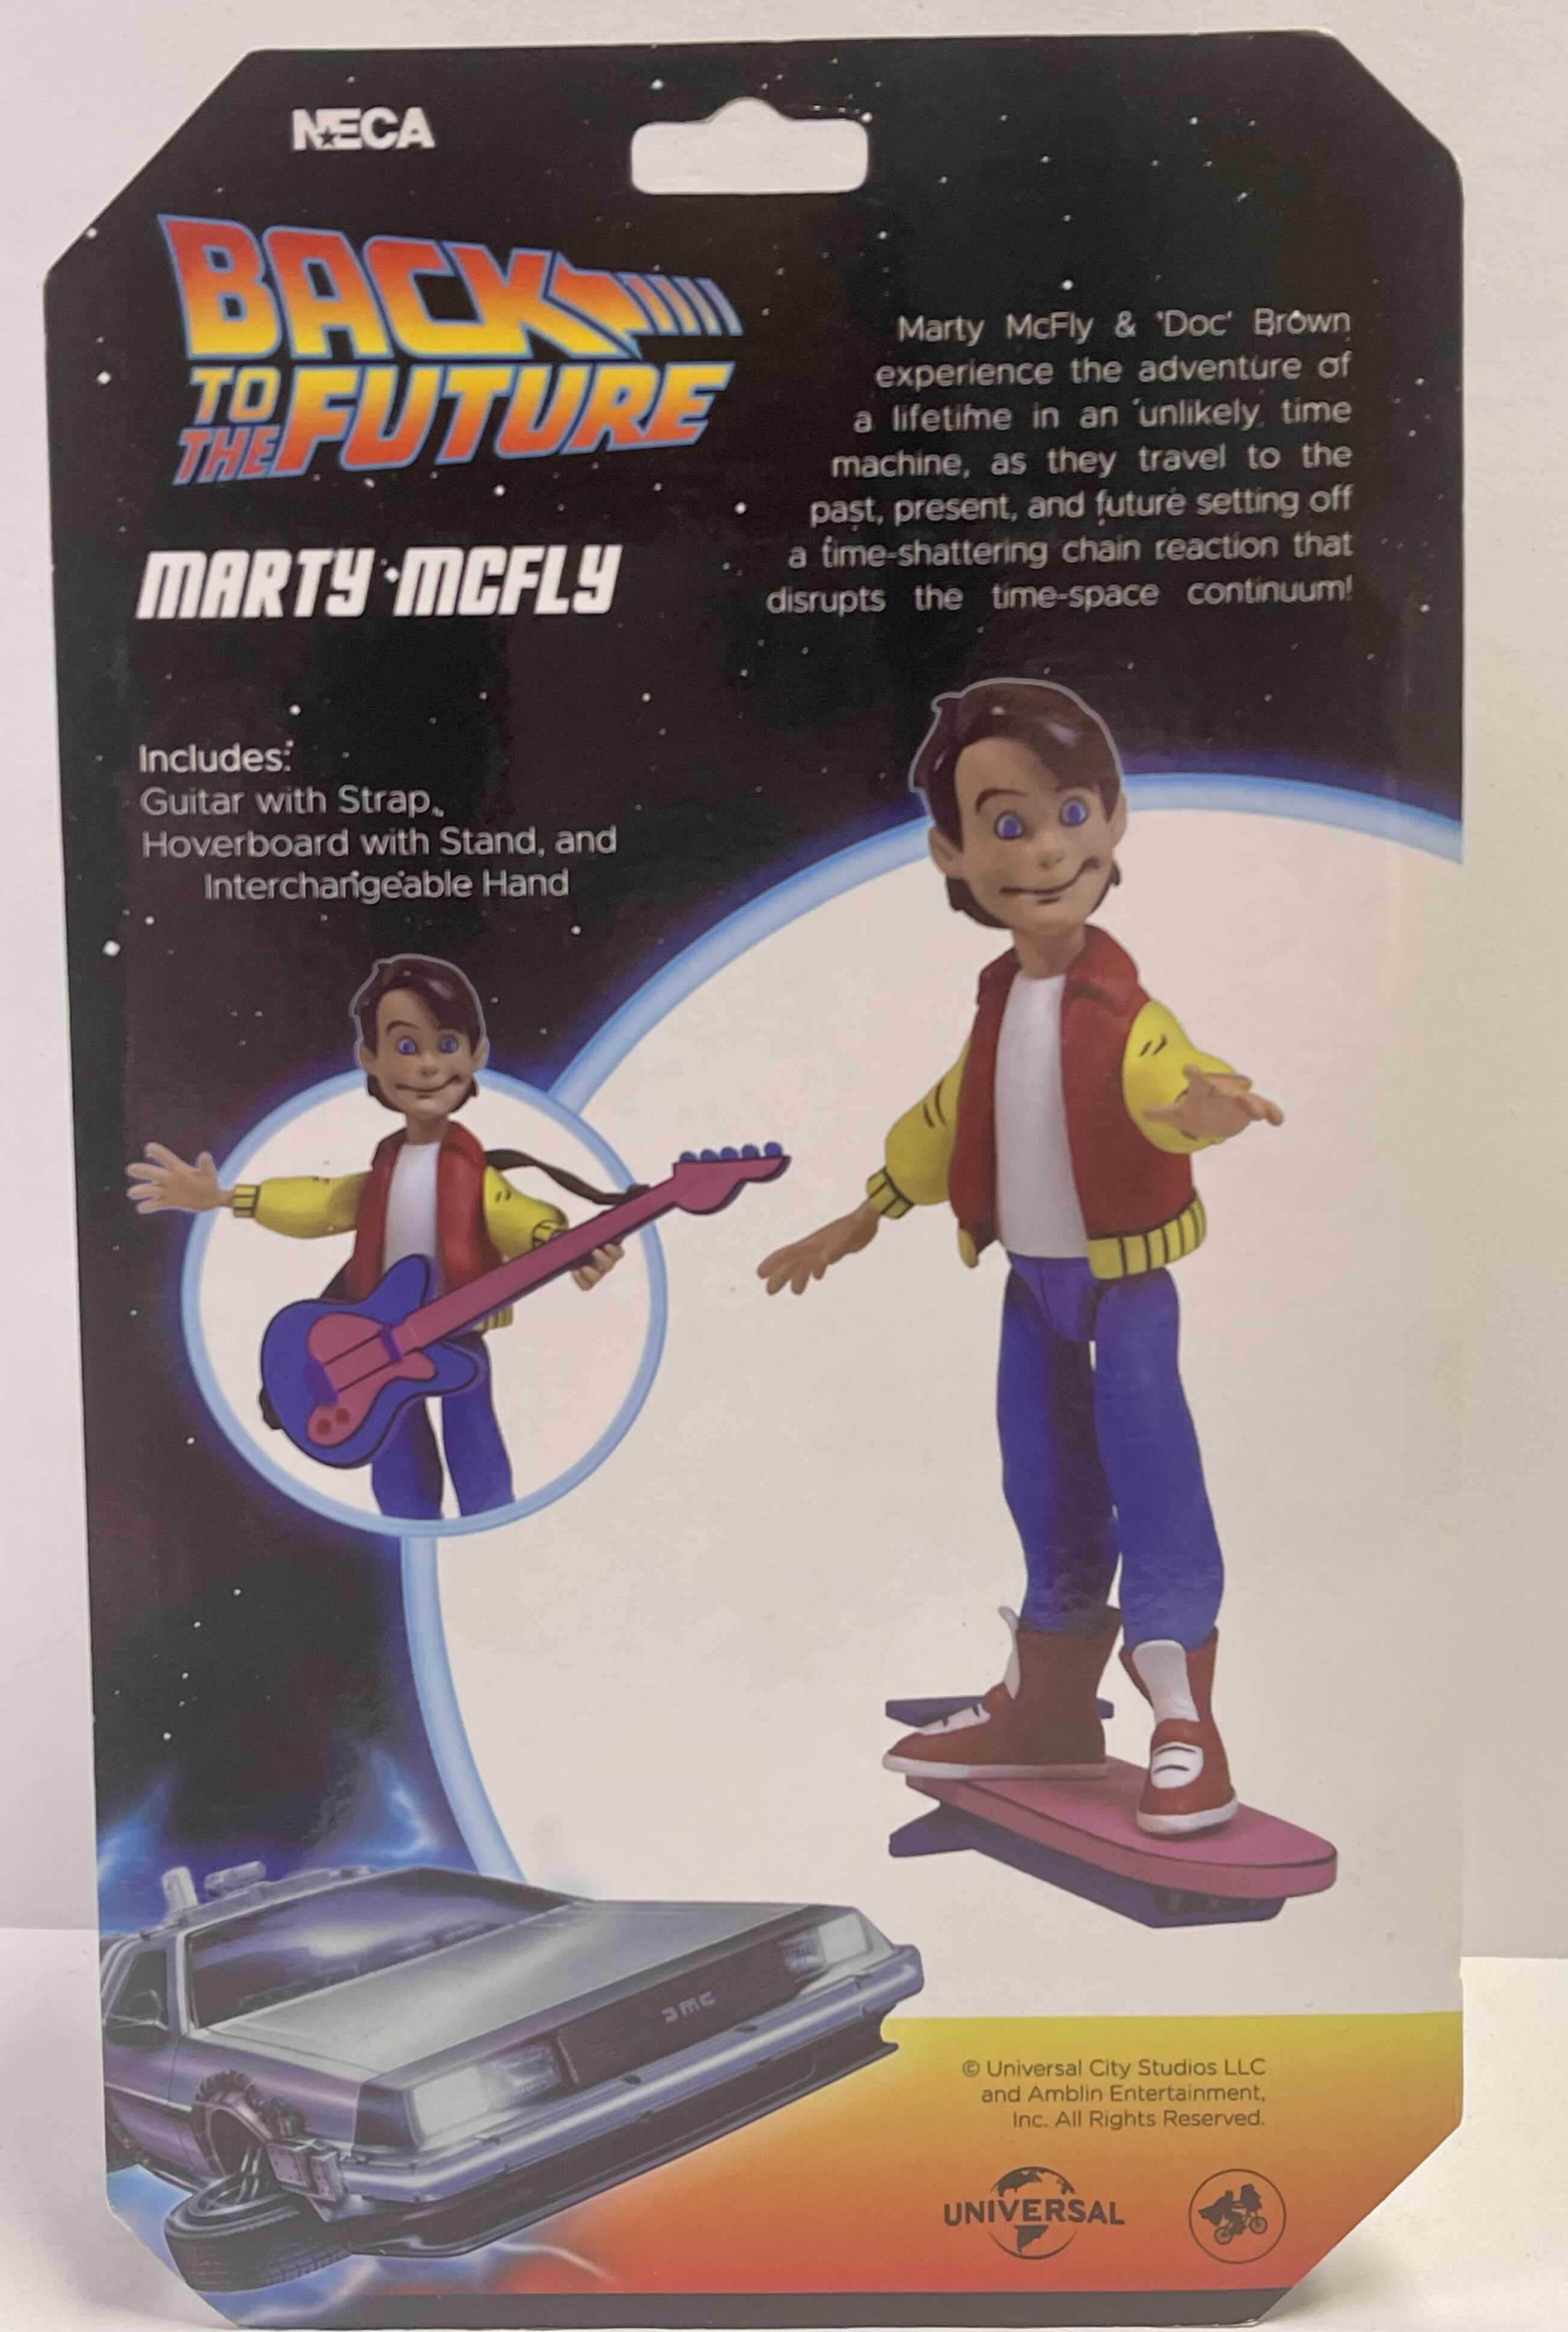 Photo 2 of NIB BACK TO THE FUTURE “MARTY MCFLY” ACTION FIGURE- RETAIL PRICE $21.99